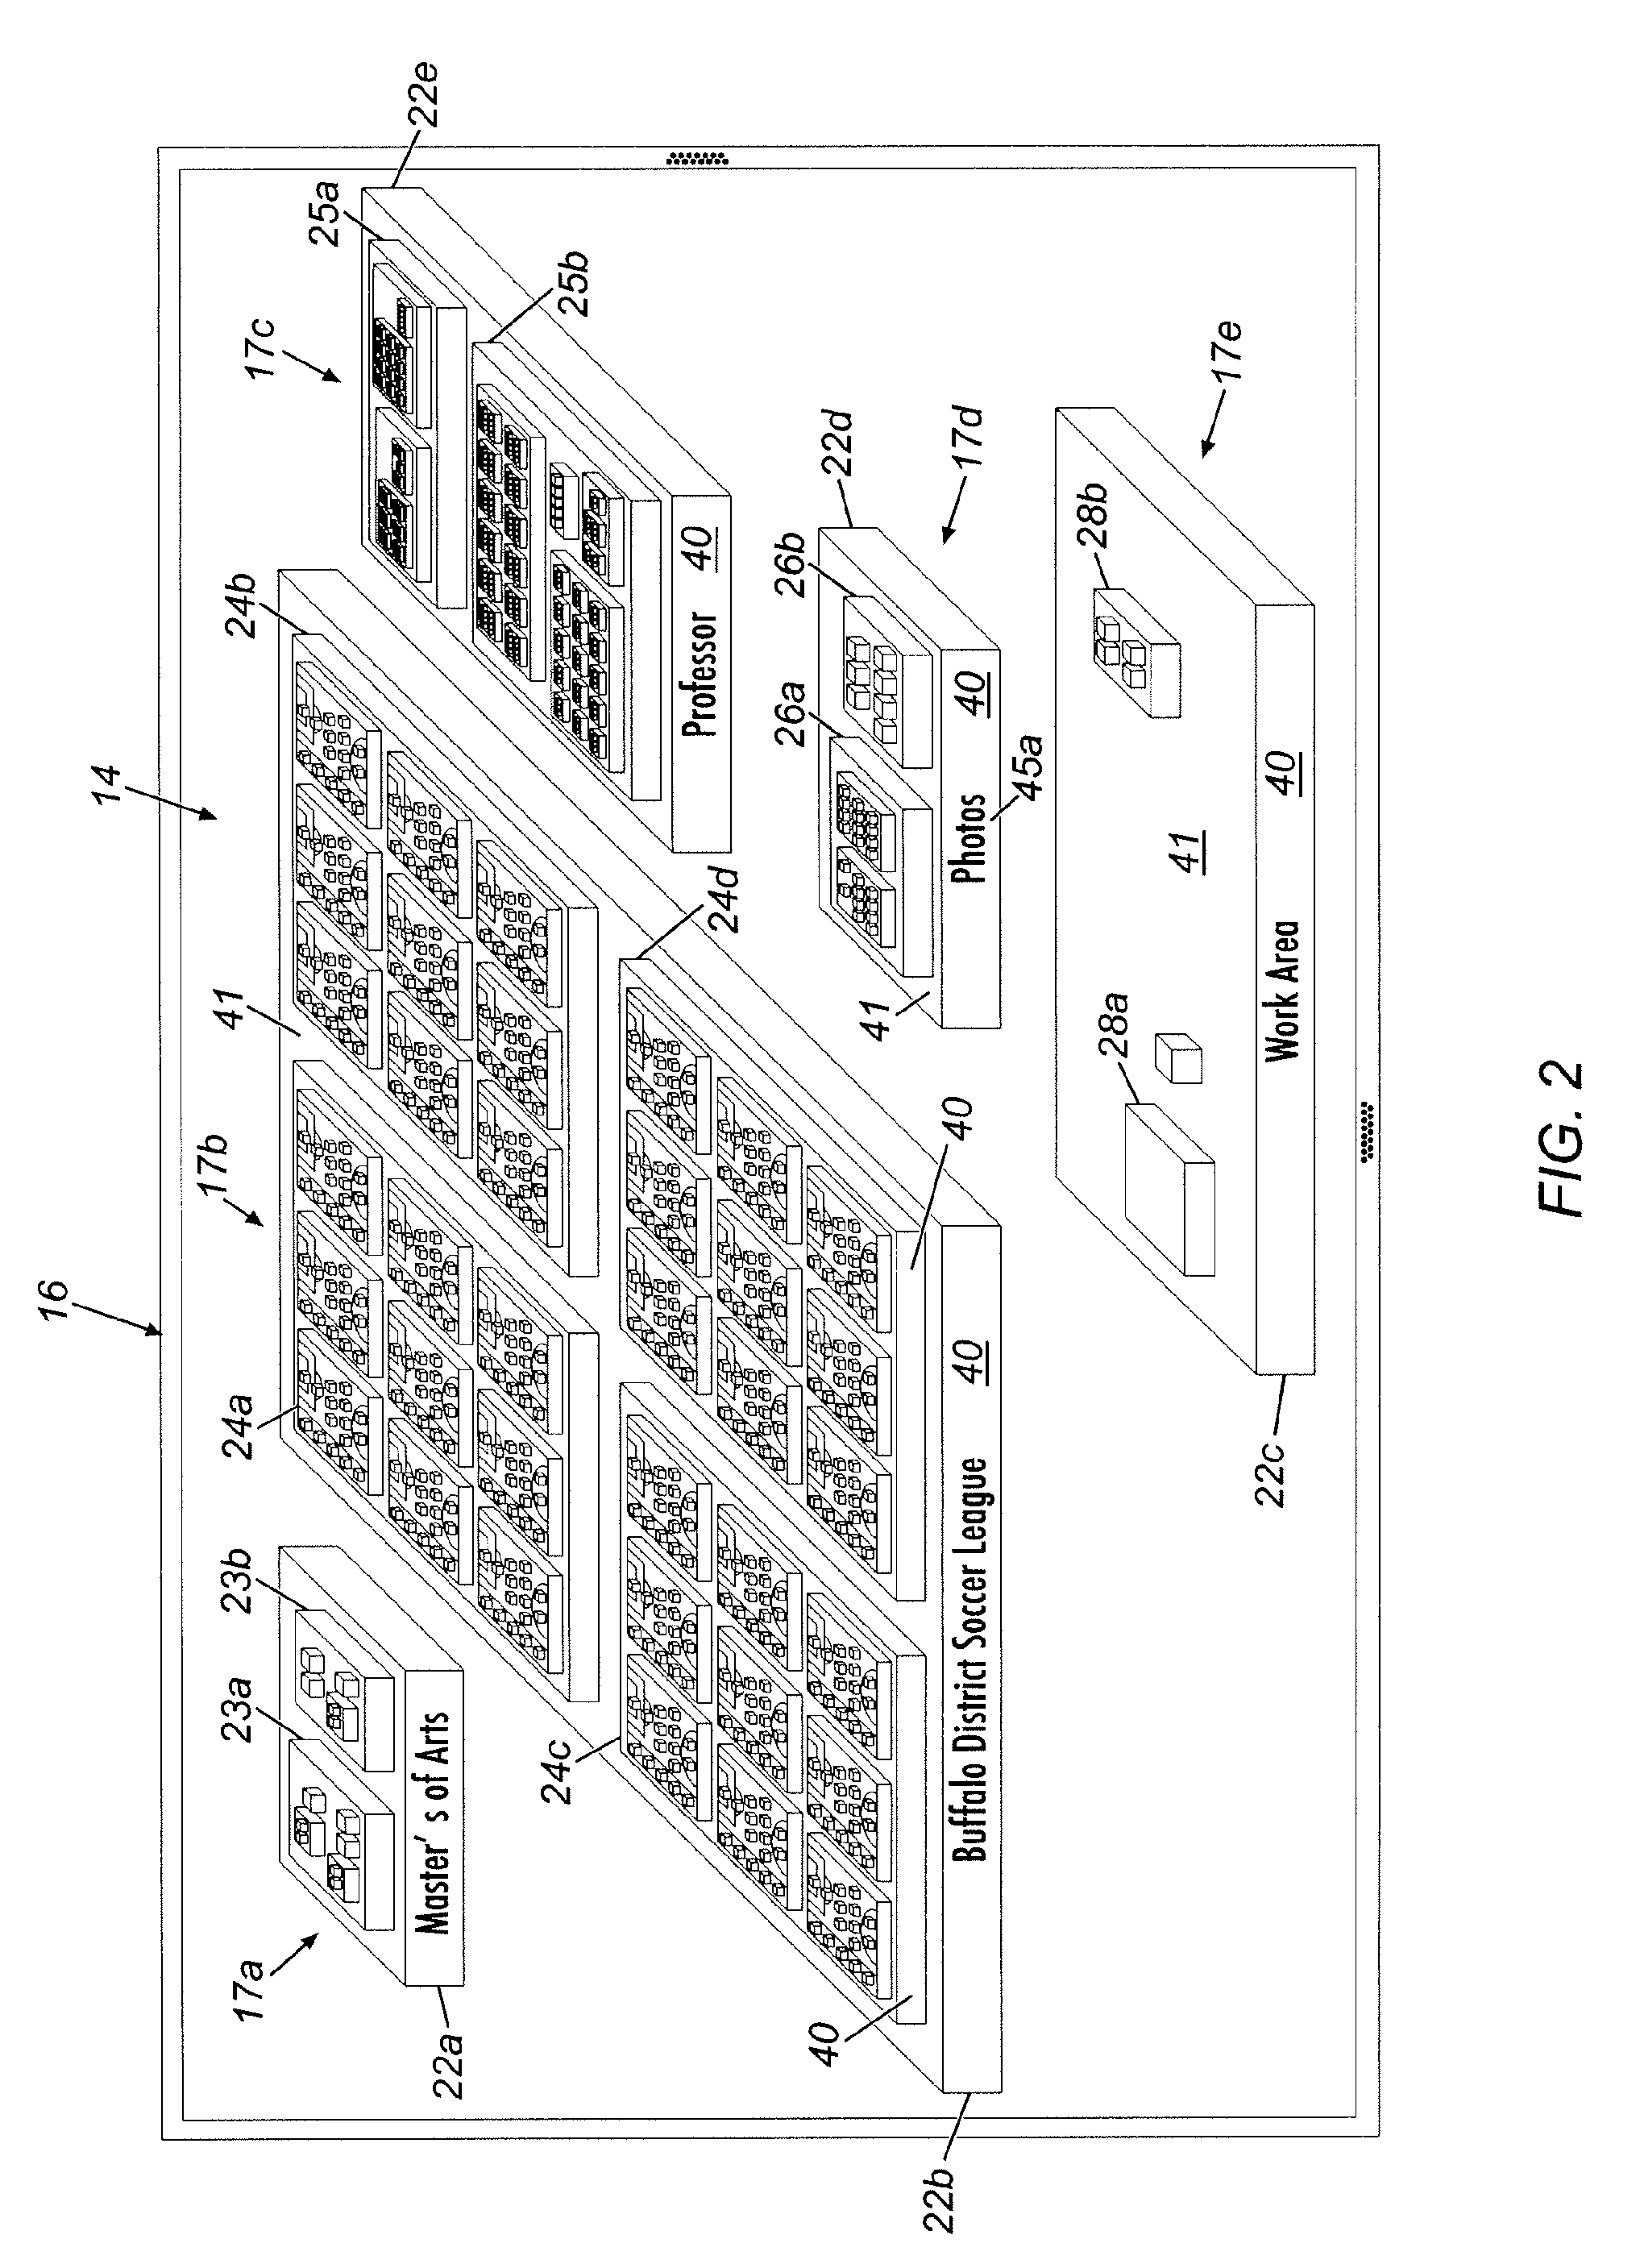 Computer graphic user interface and display system